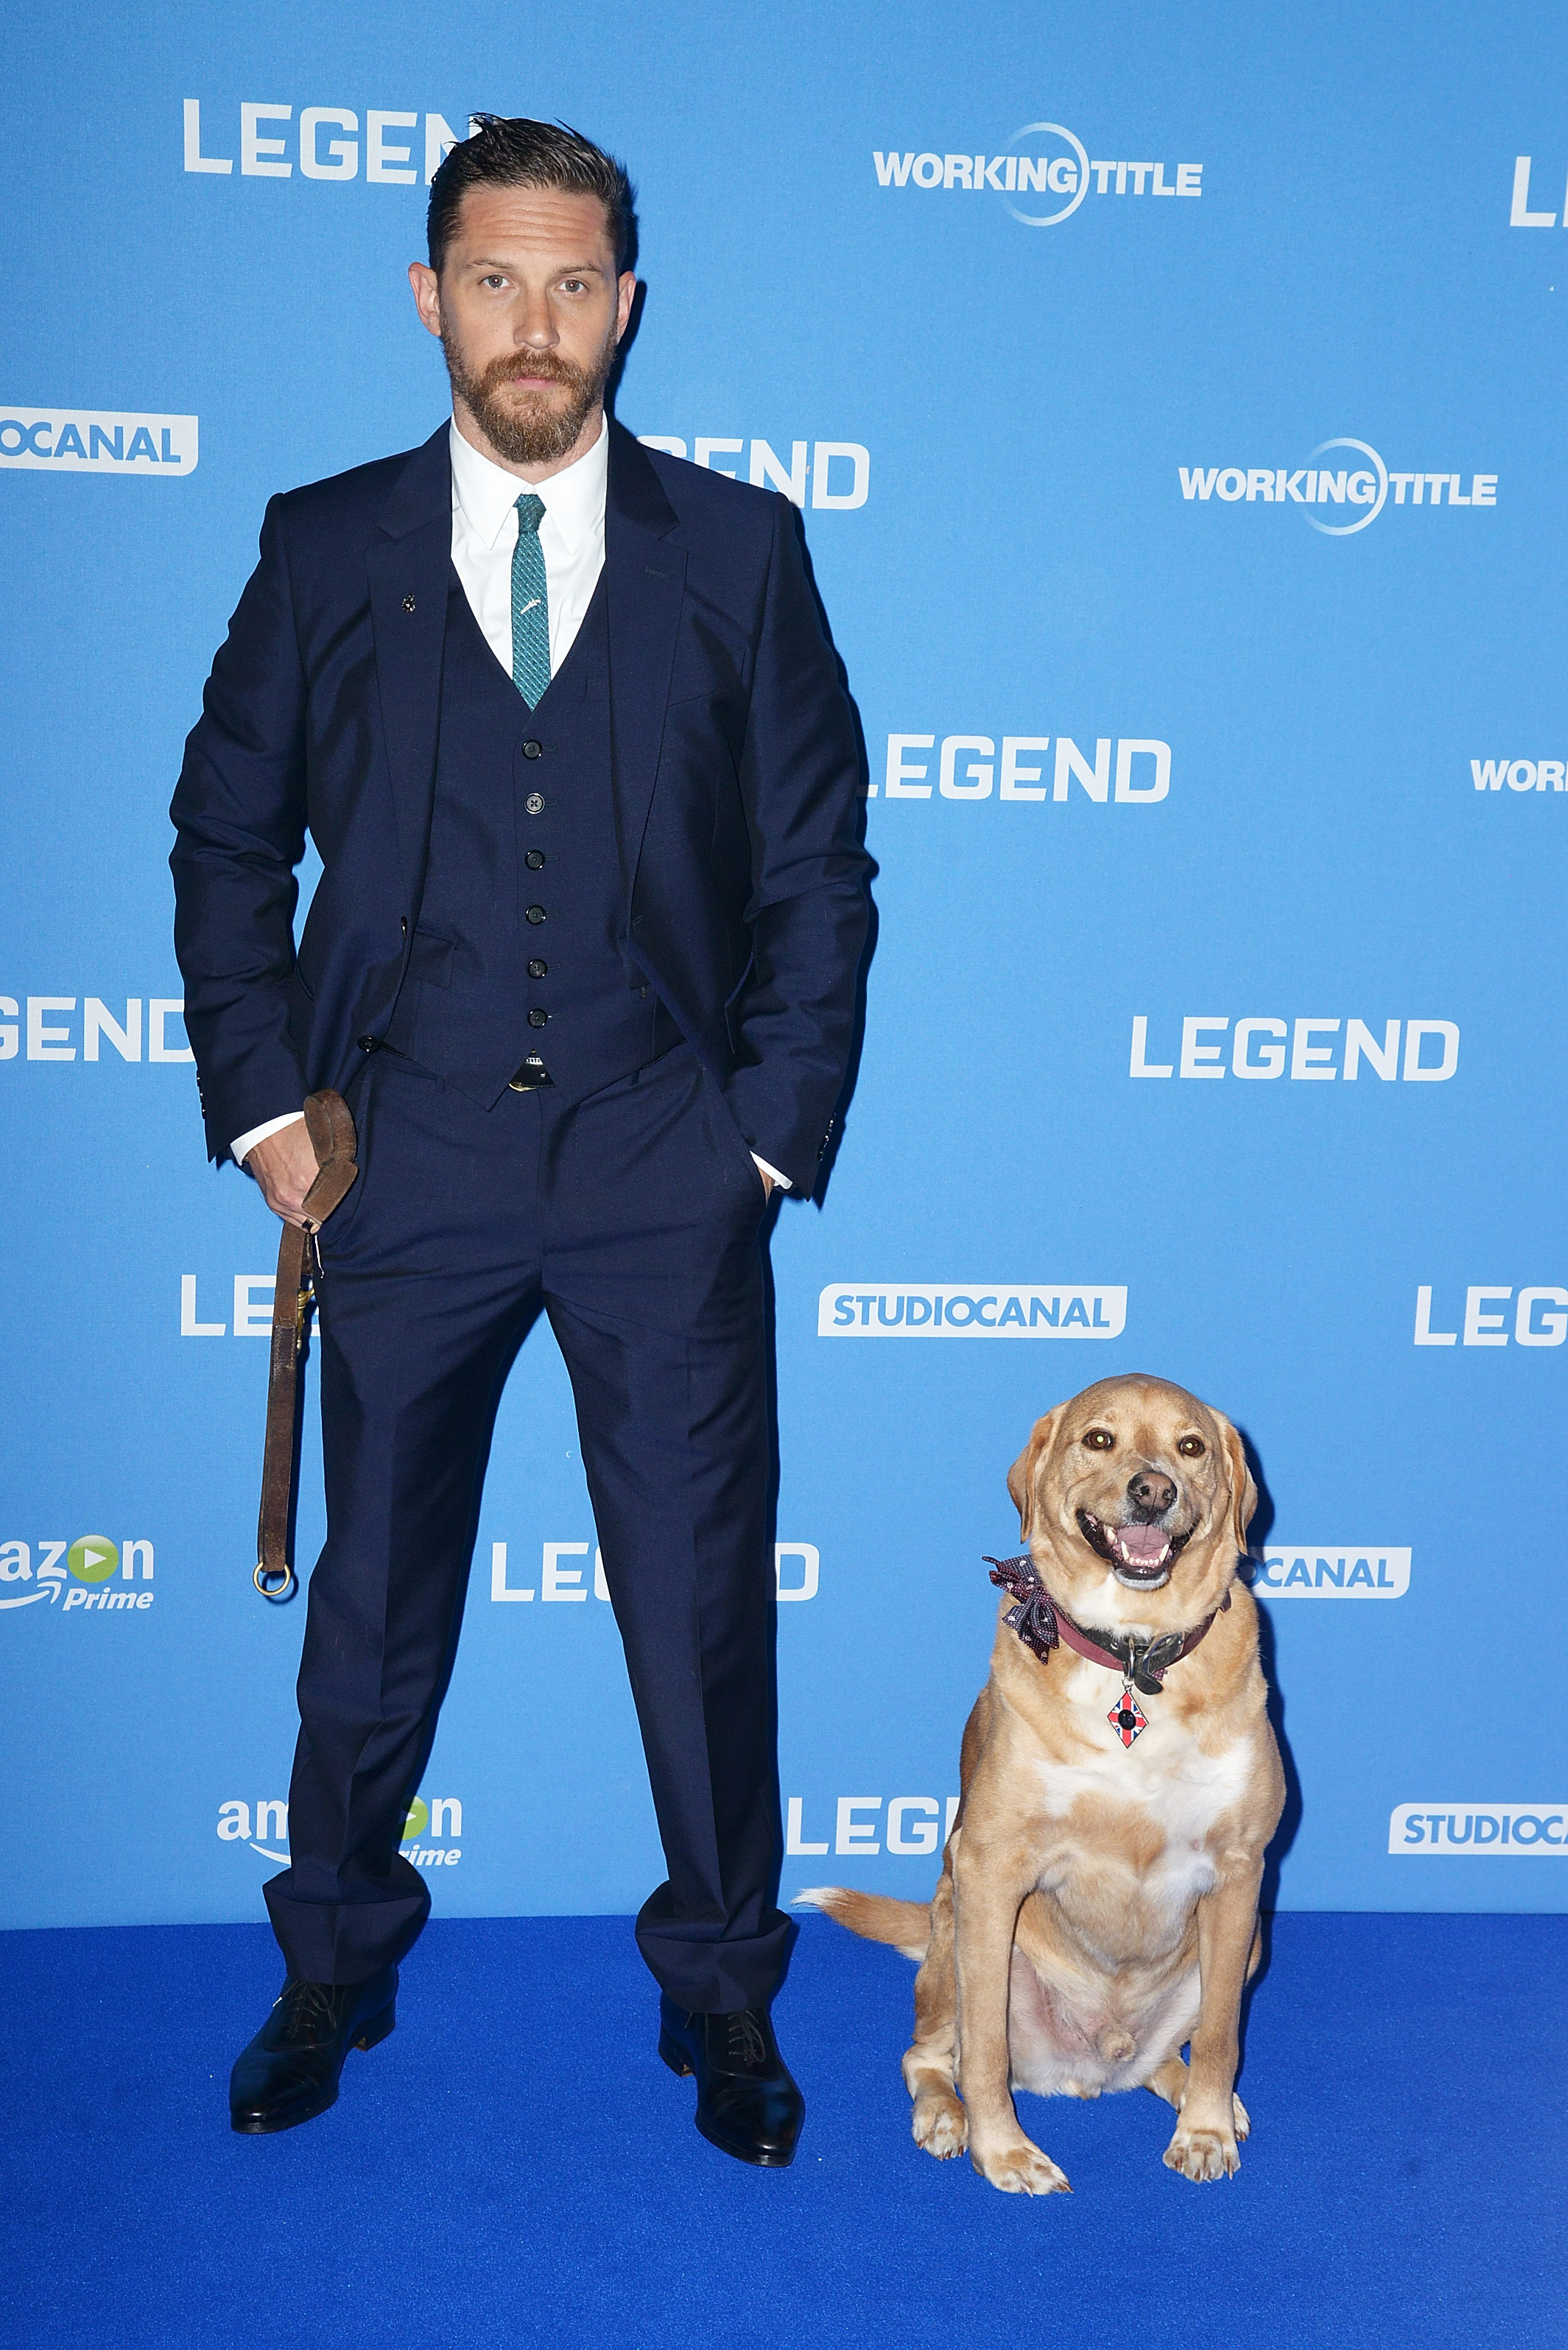 Tom Hardy and dog 'Woody' attend the U.K. Premiere of "Legend" at Odeon Leicester Square on September 3, 2015 in London, England.